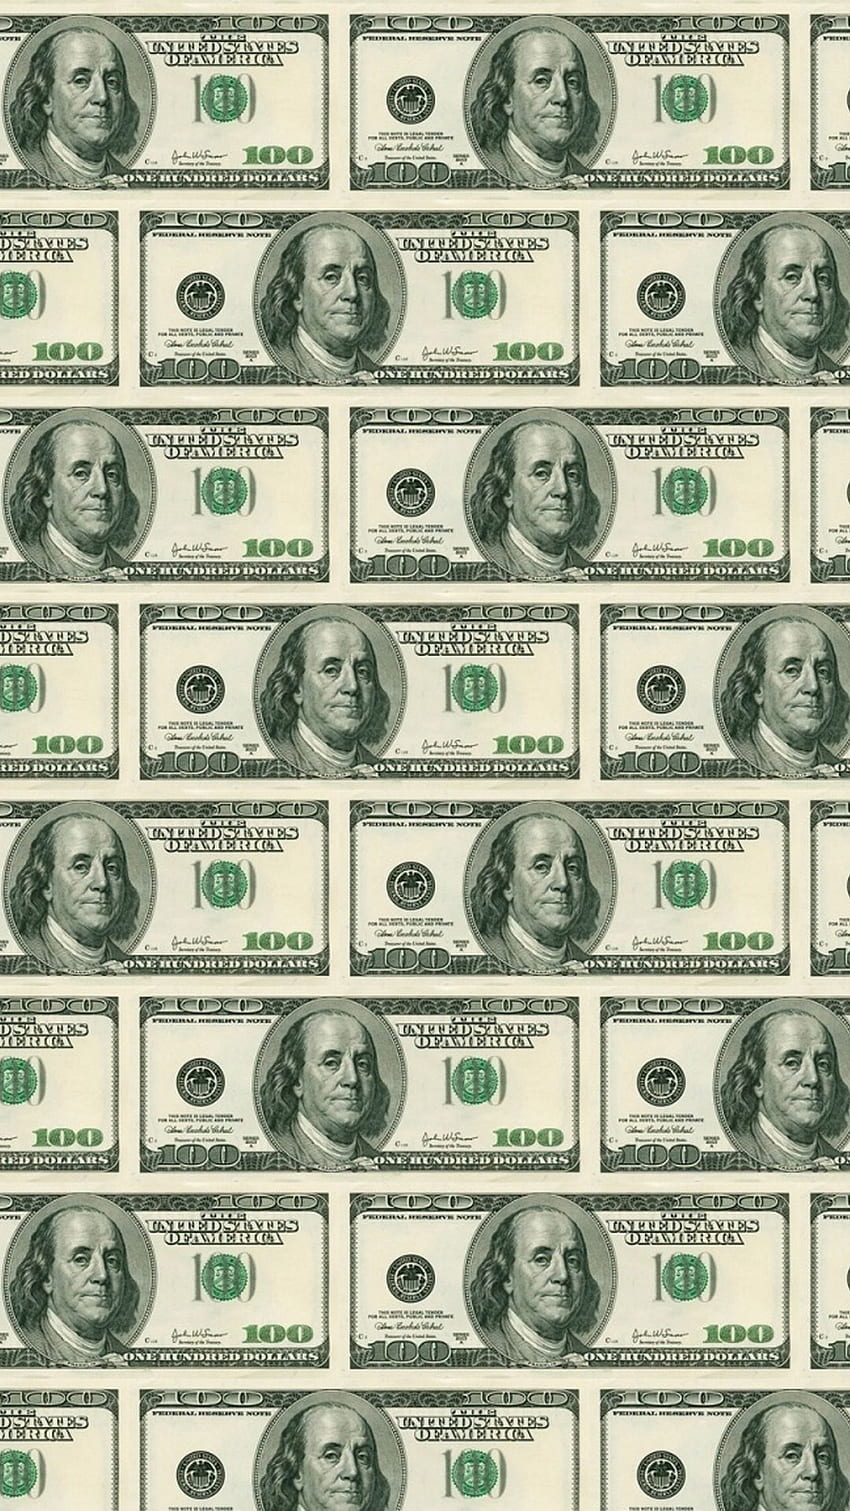 US Dollars IPhone 6 6 Plus And IPhone 5 4 HD phone wallpaper